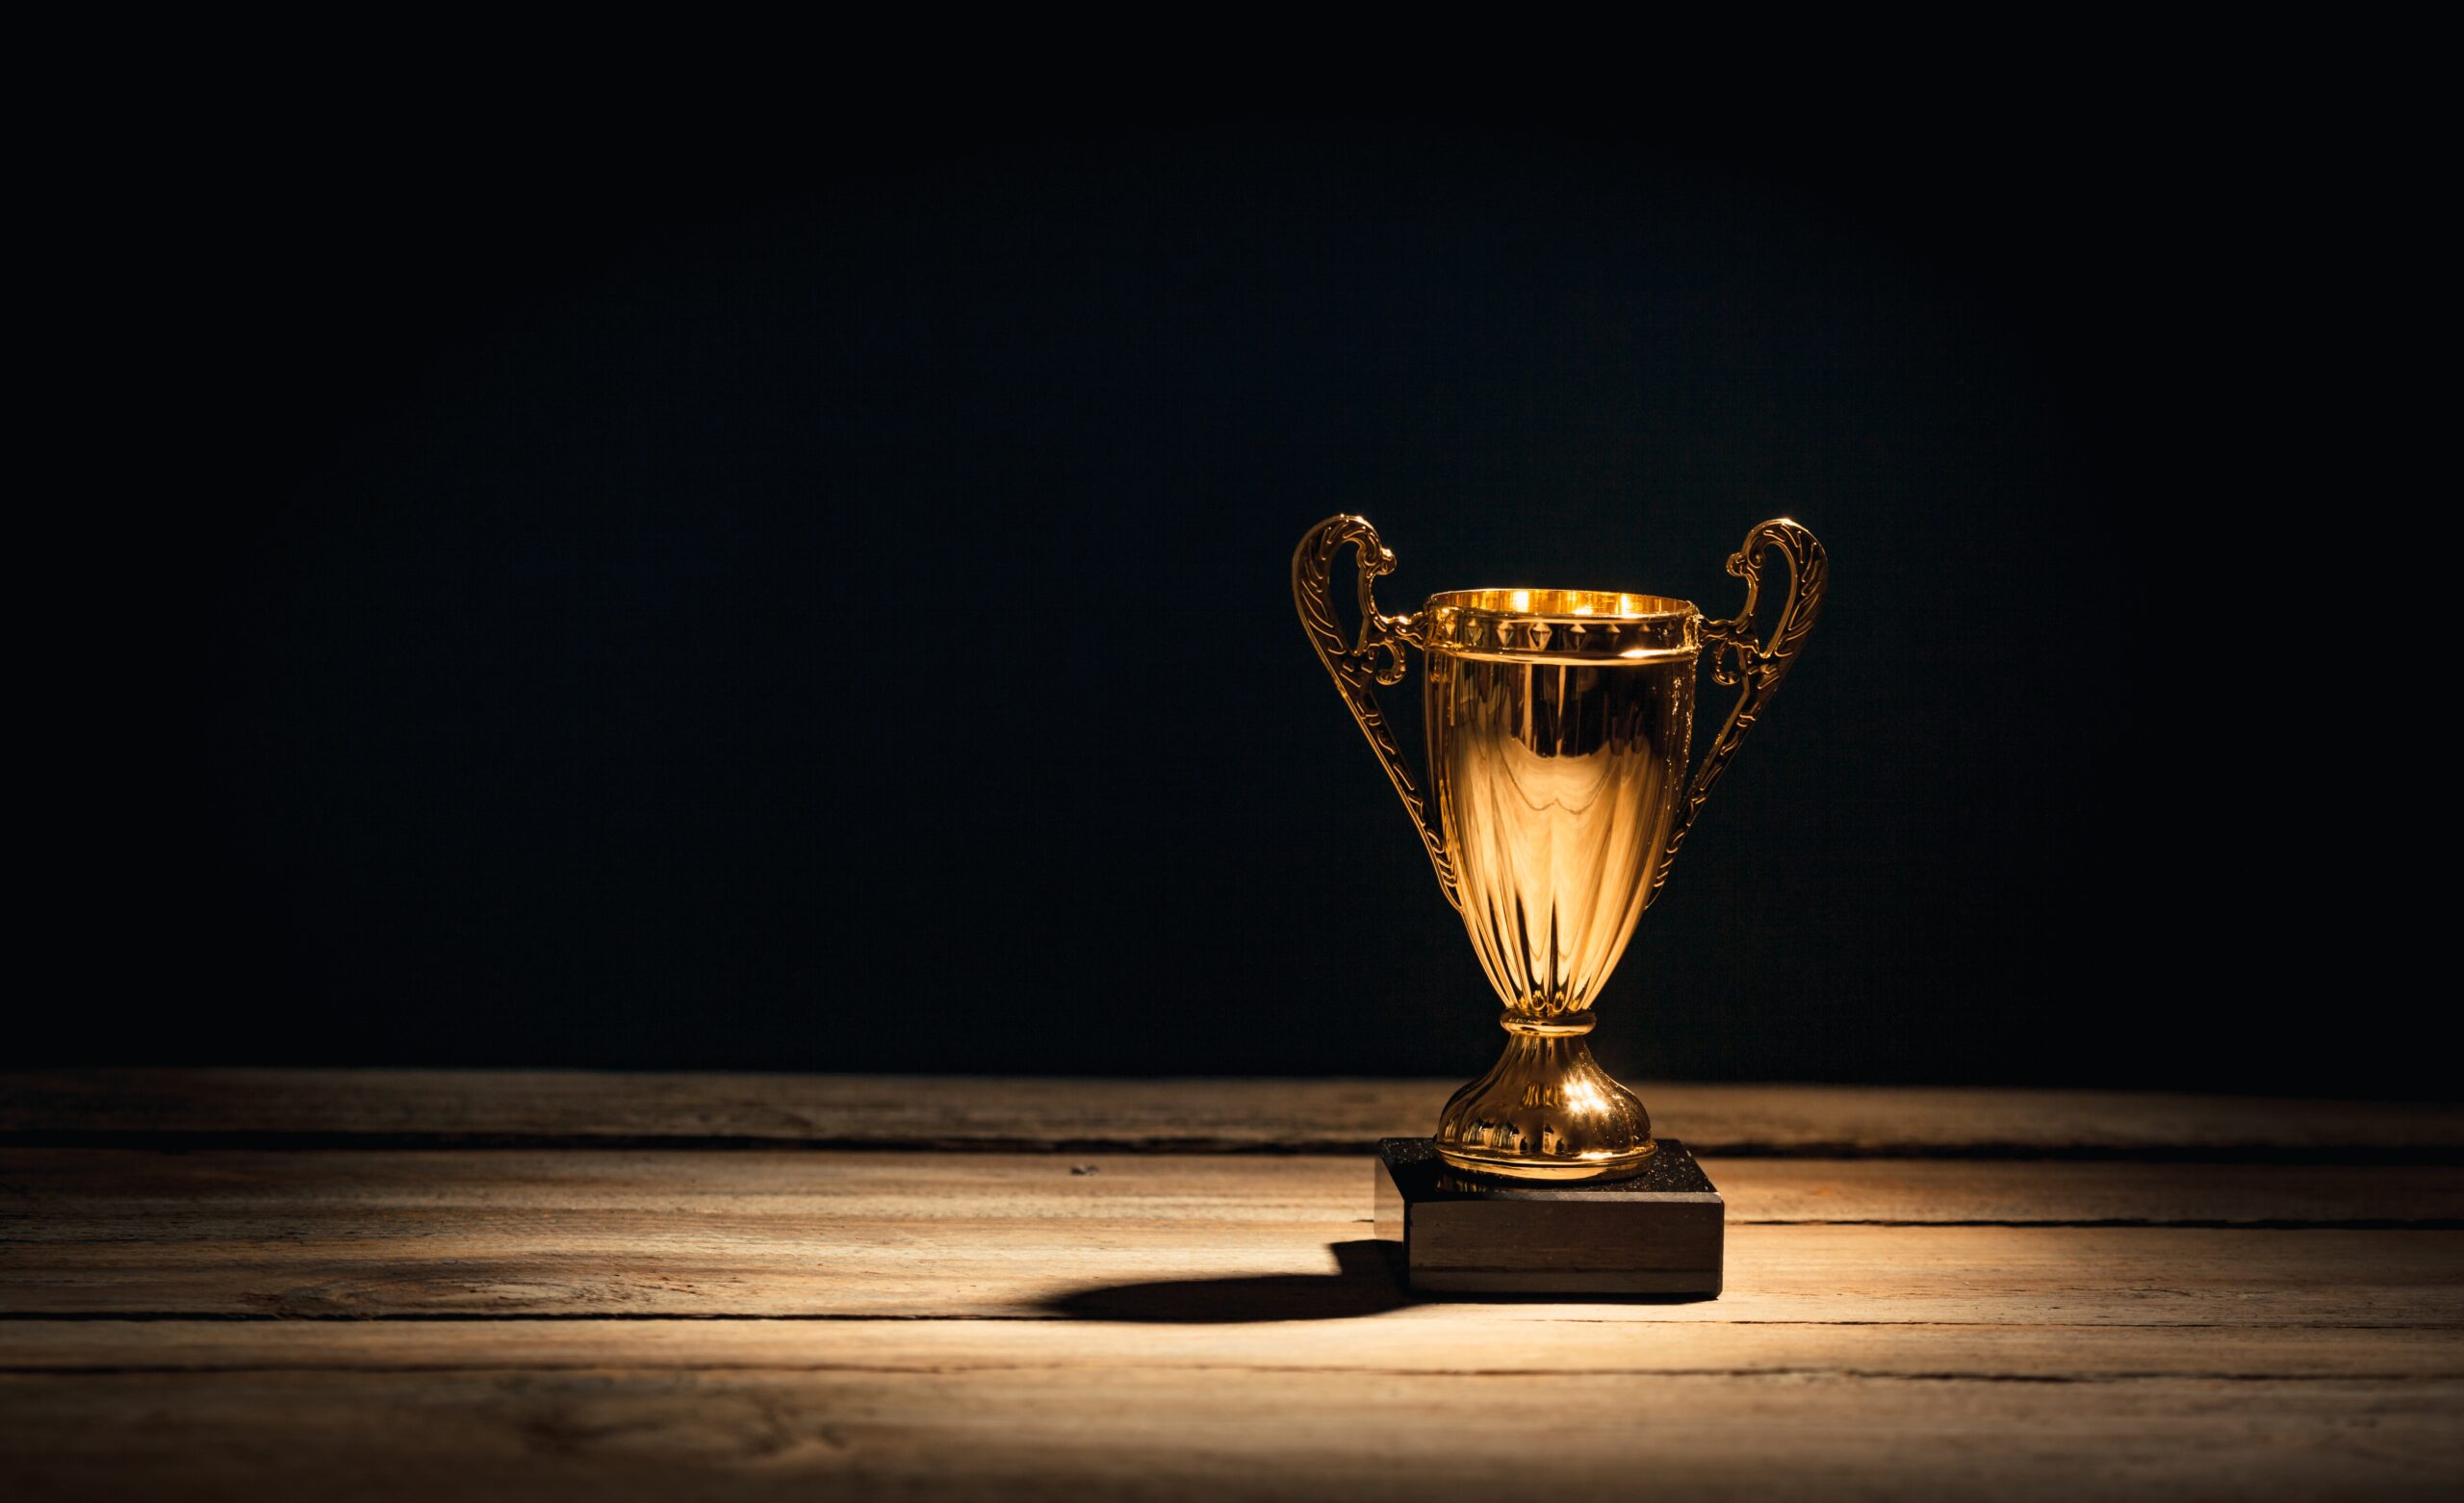 Golden sports trophy cup on wood desk with dramatic strong contrast light and shadow